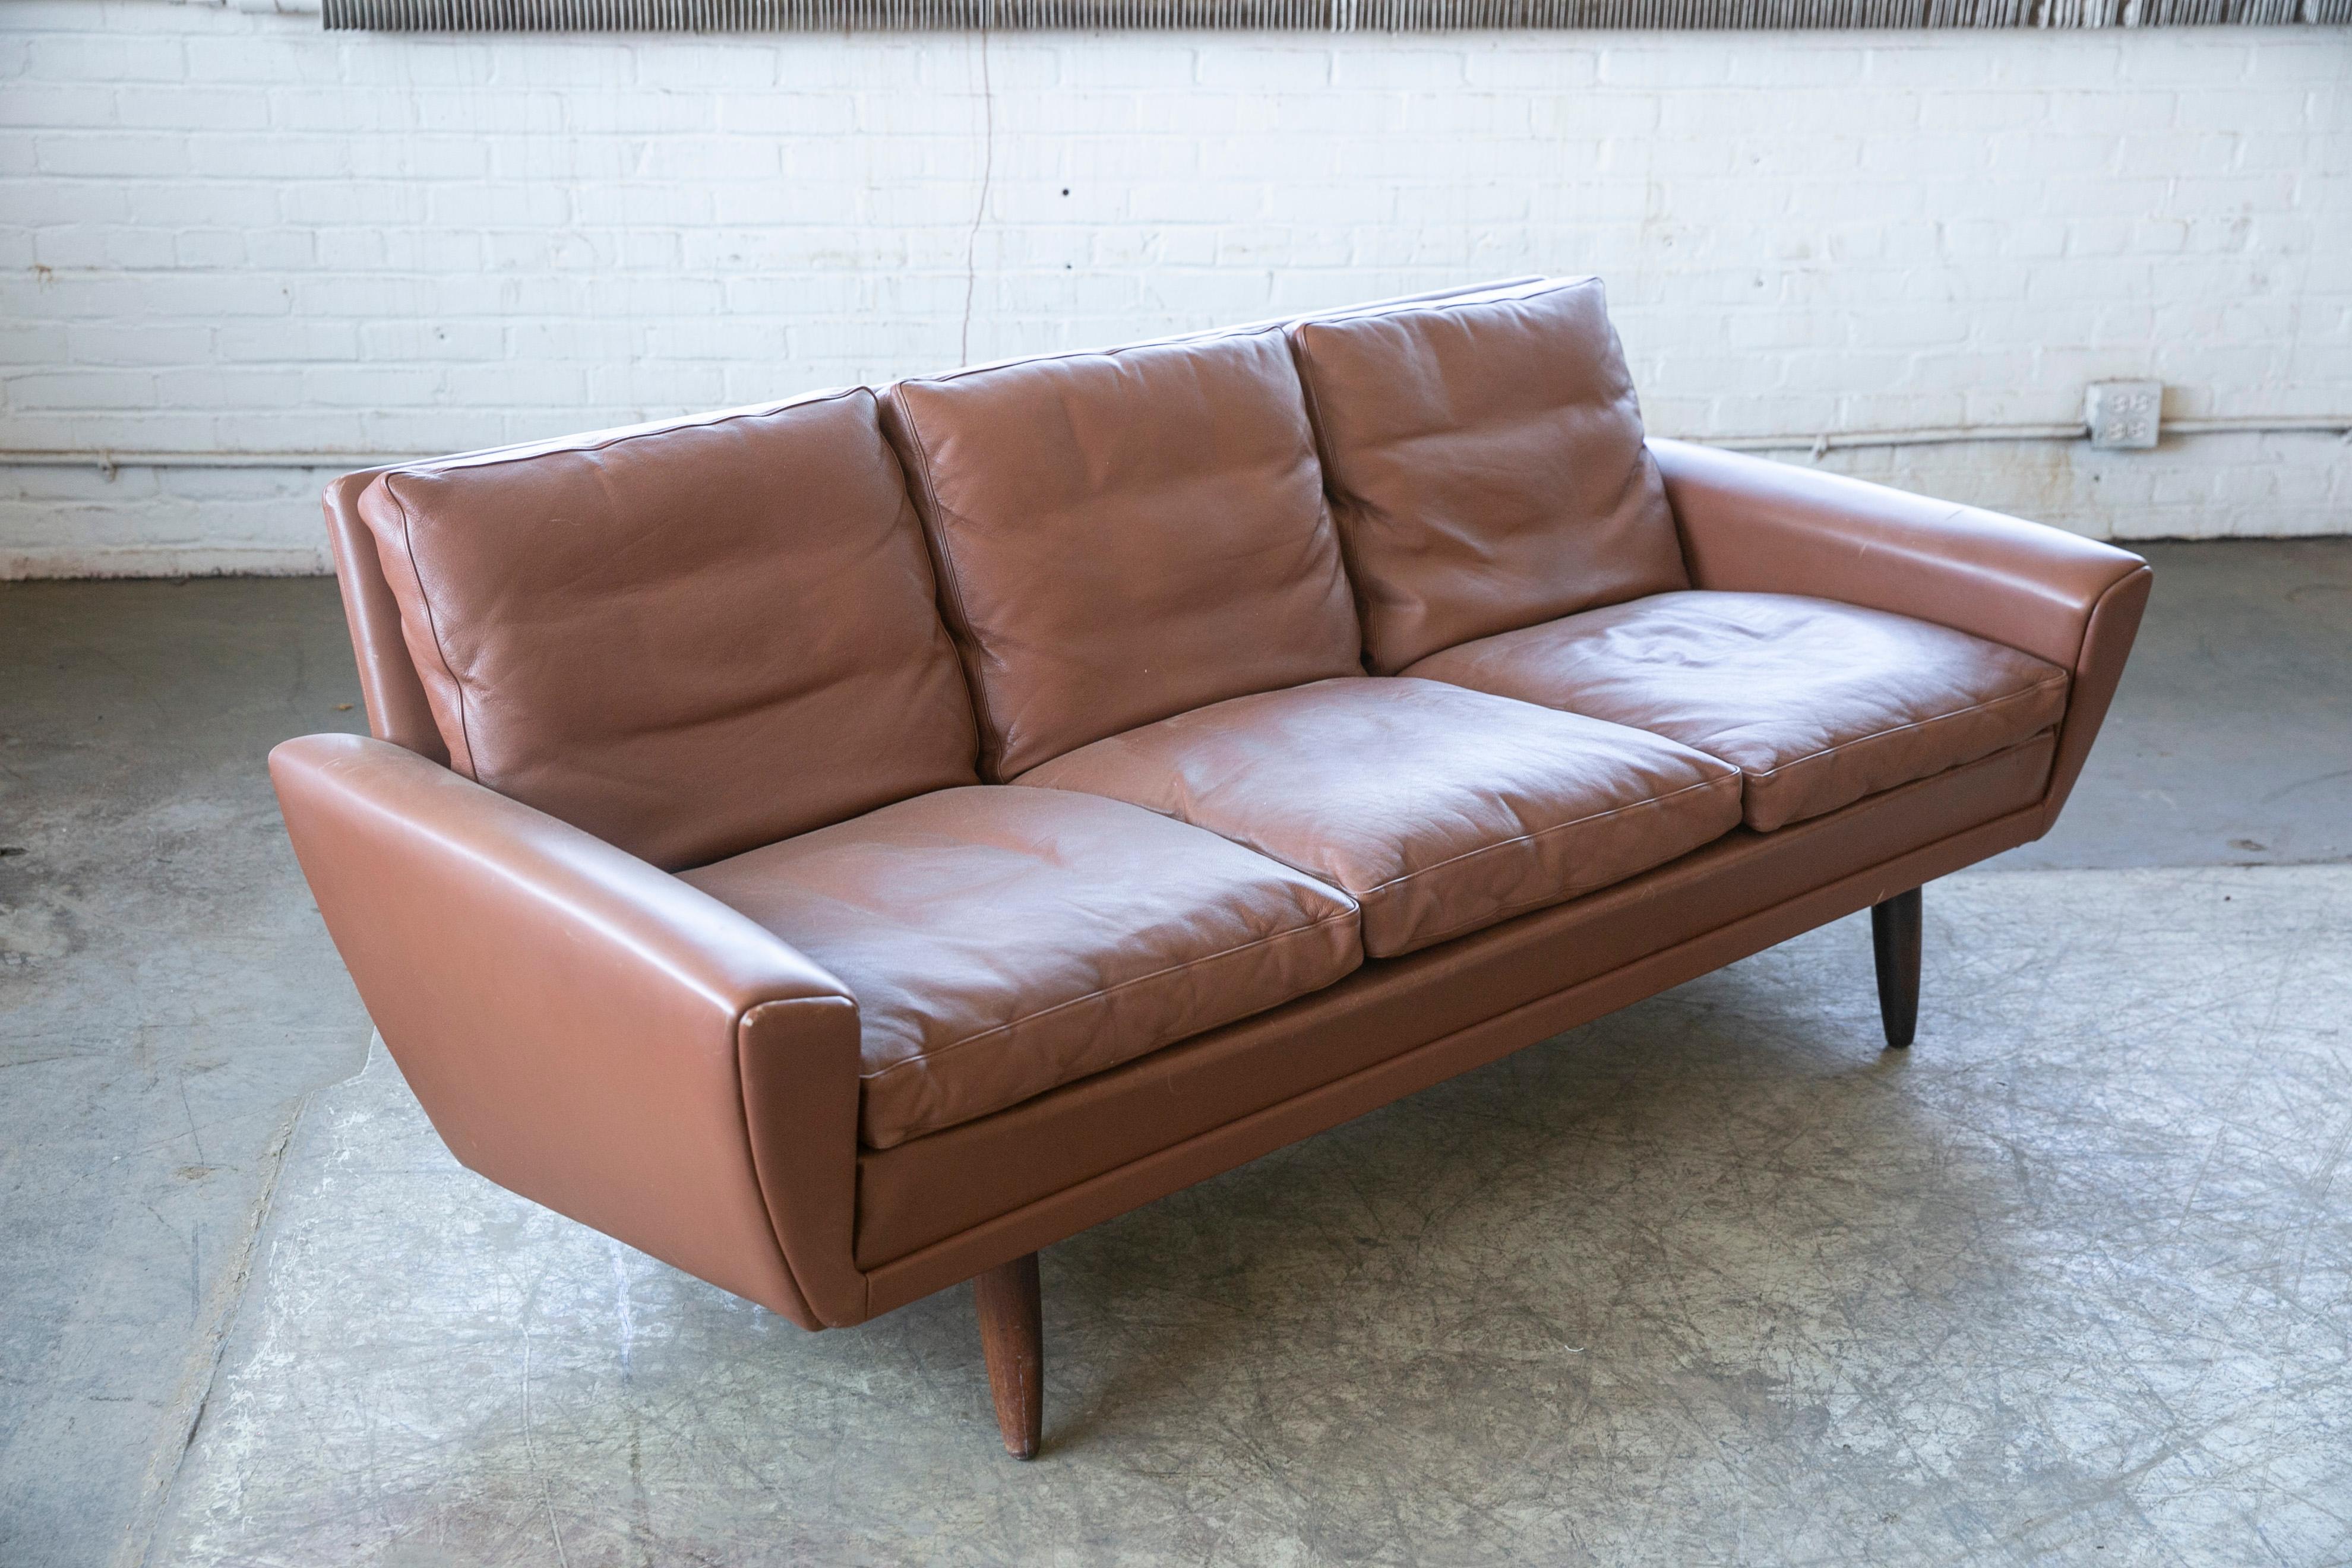 Classic Danish 1960s designed sofa by Kurt Ostervig in a nice cognac brown leather and probably produced by either Ryesberg or Rolschau Mobler of Denmark both of which produced furniture for Designer, Kurt Ostervig. Down filled cushions for that